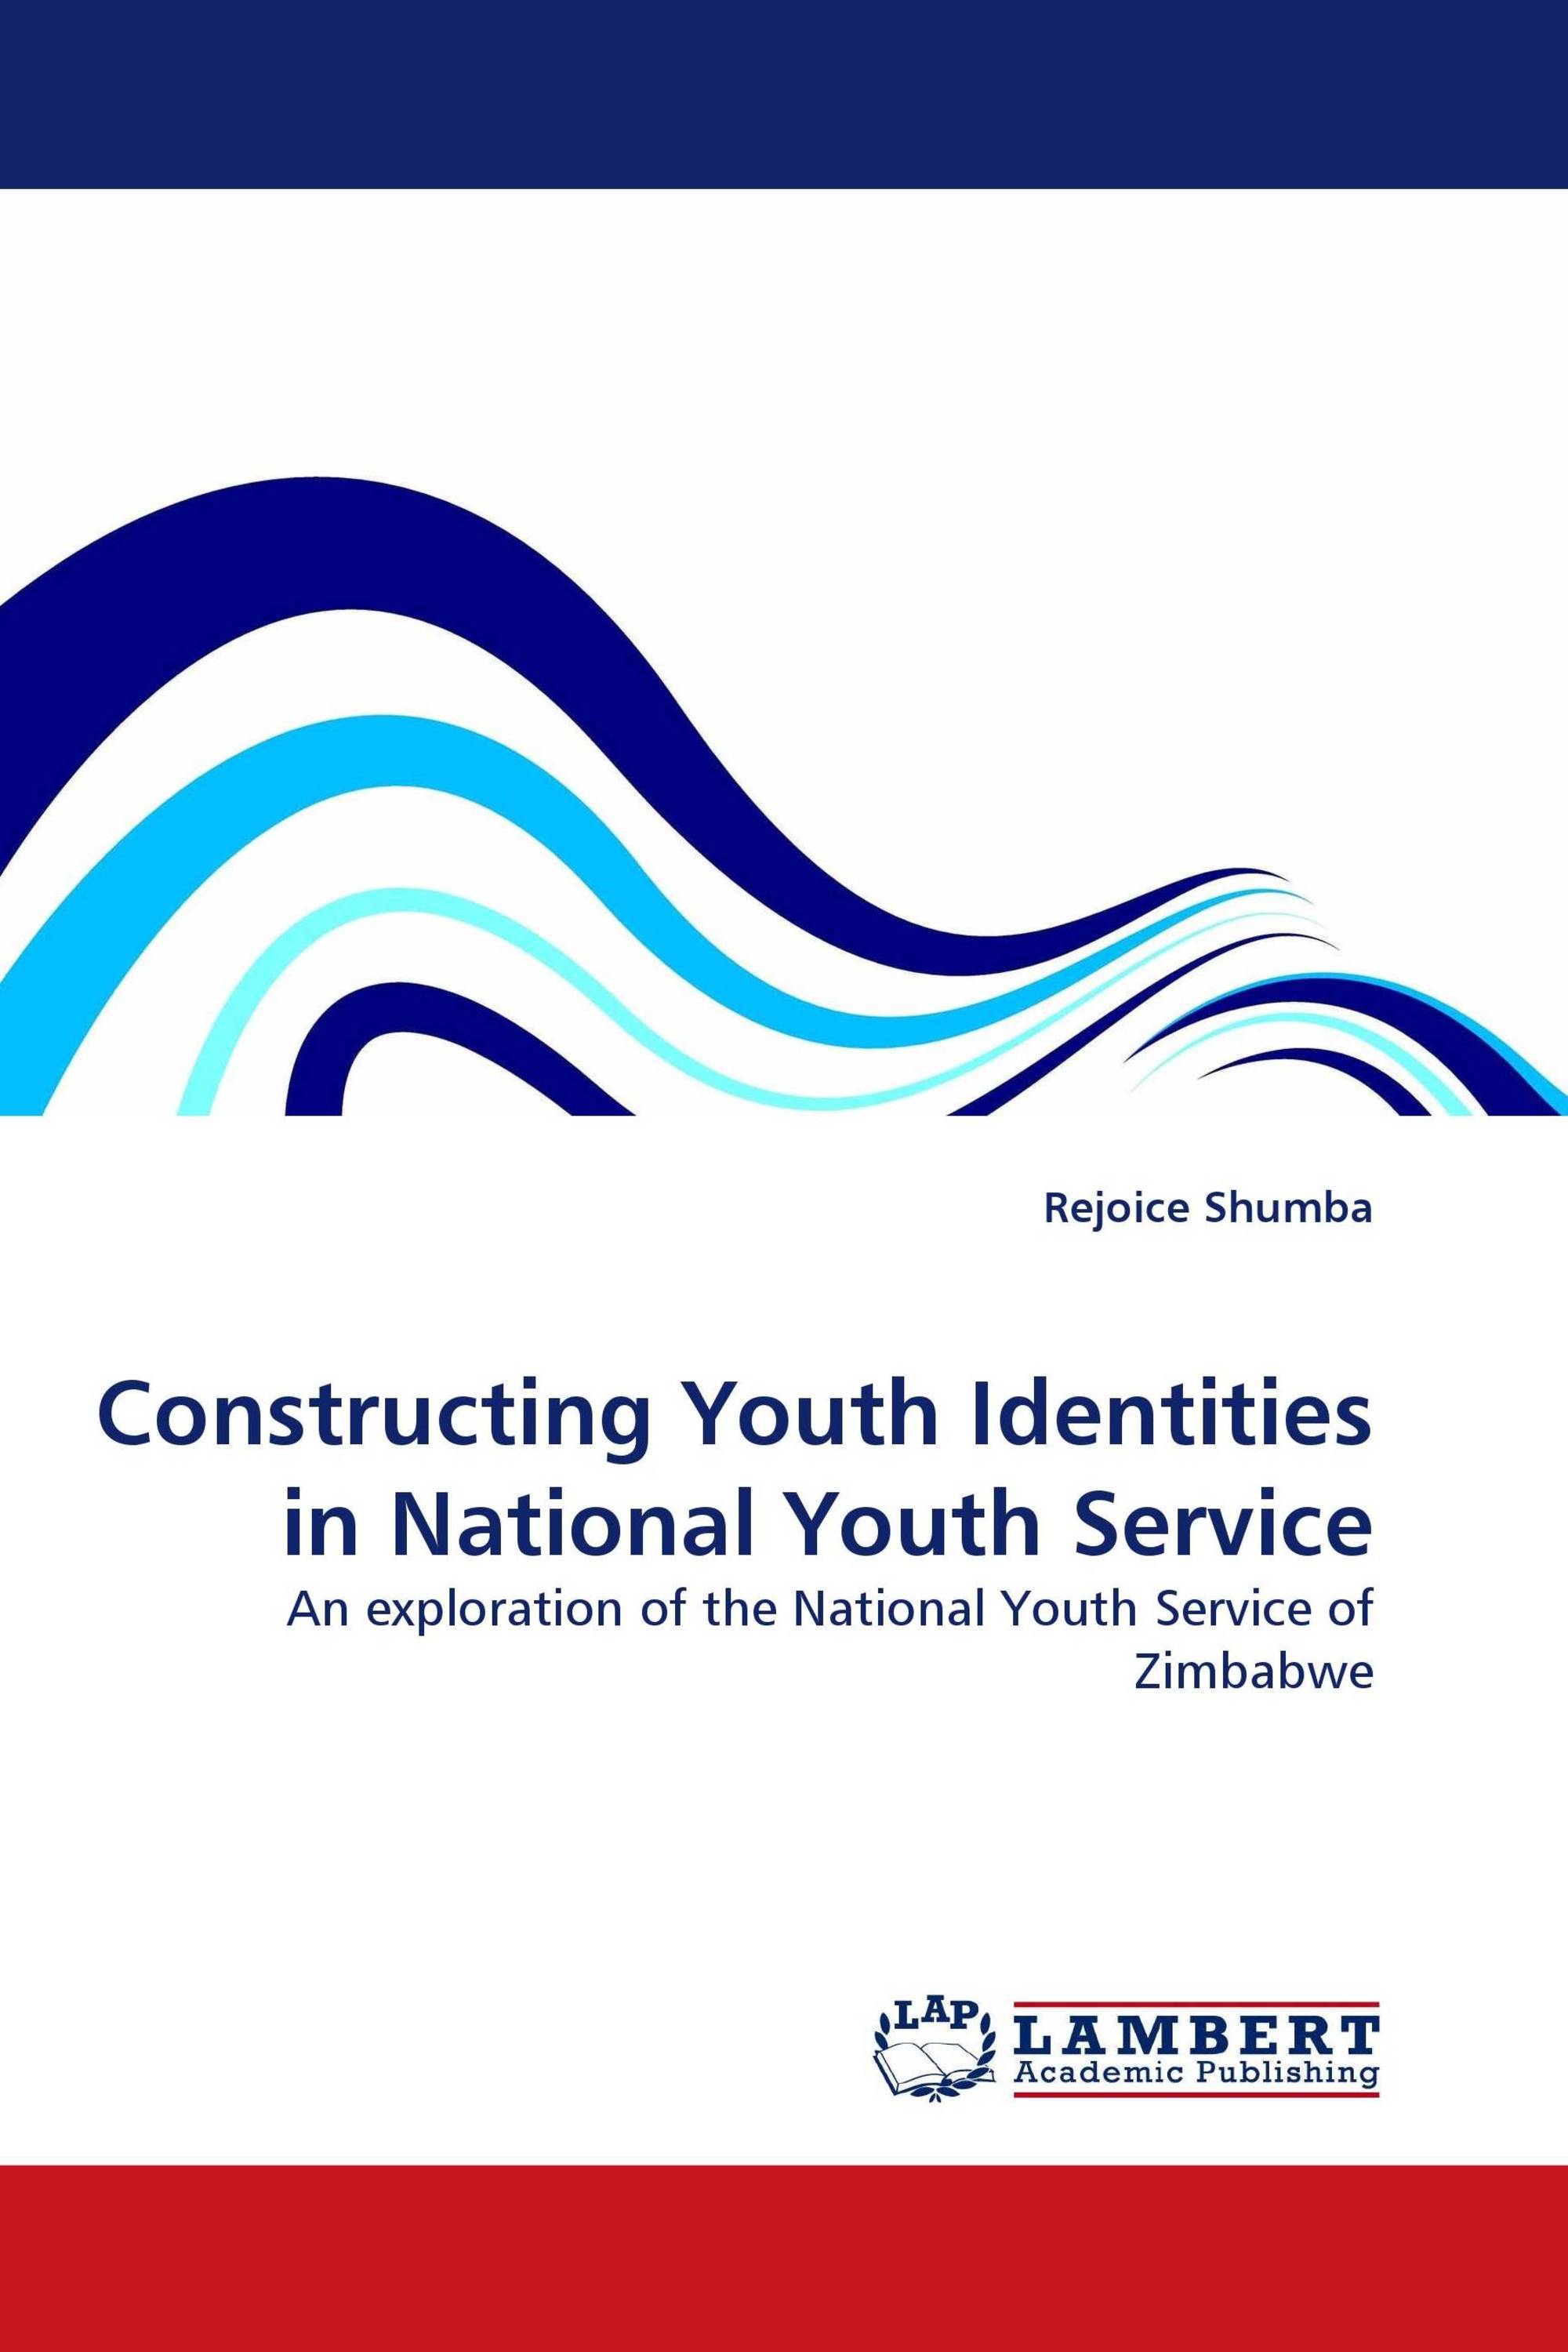 Constructing Youth Identities in National Youth Service